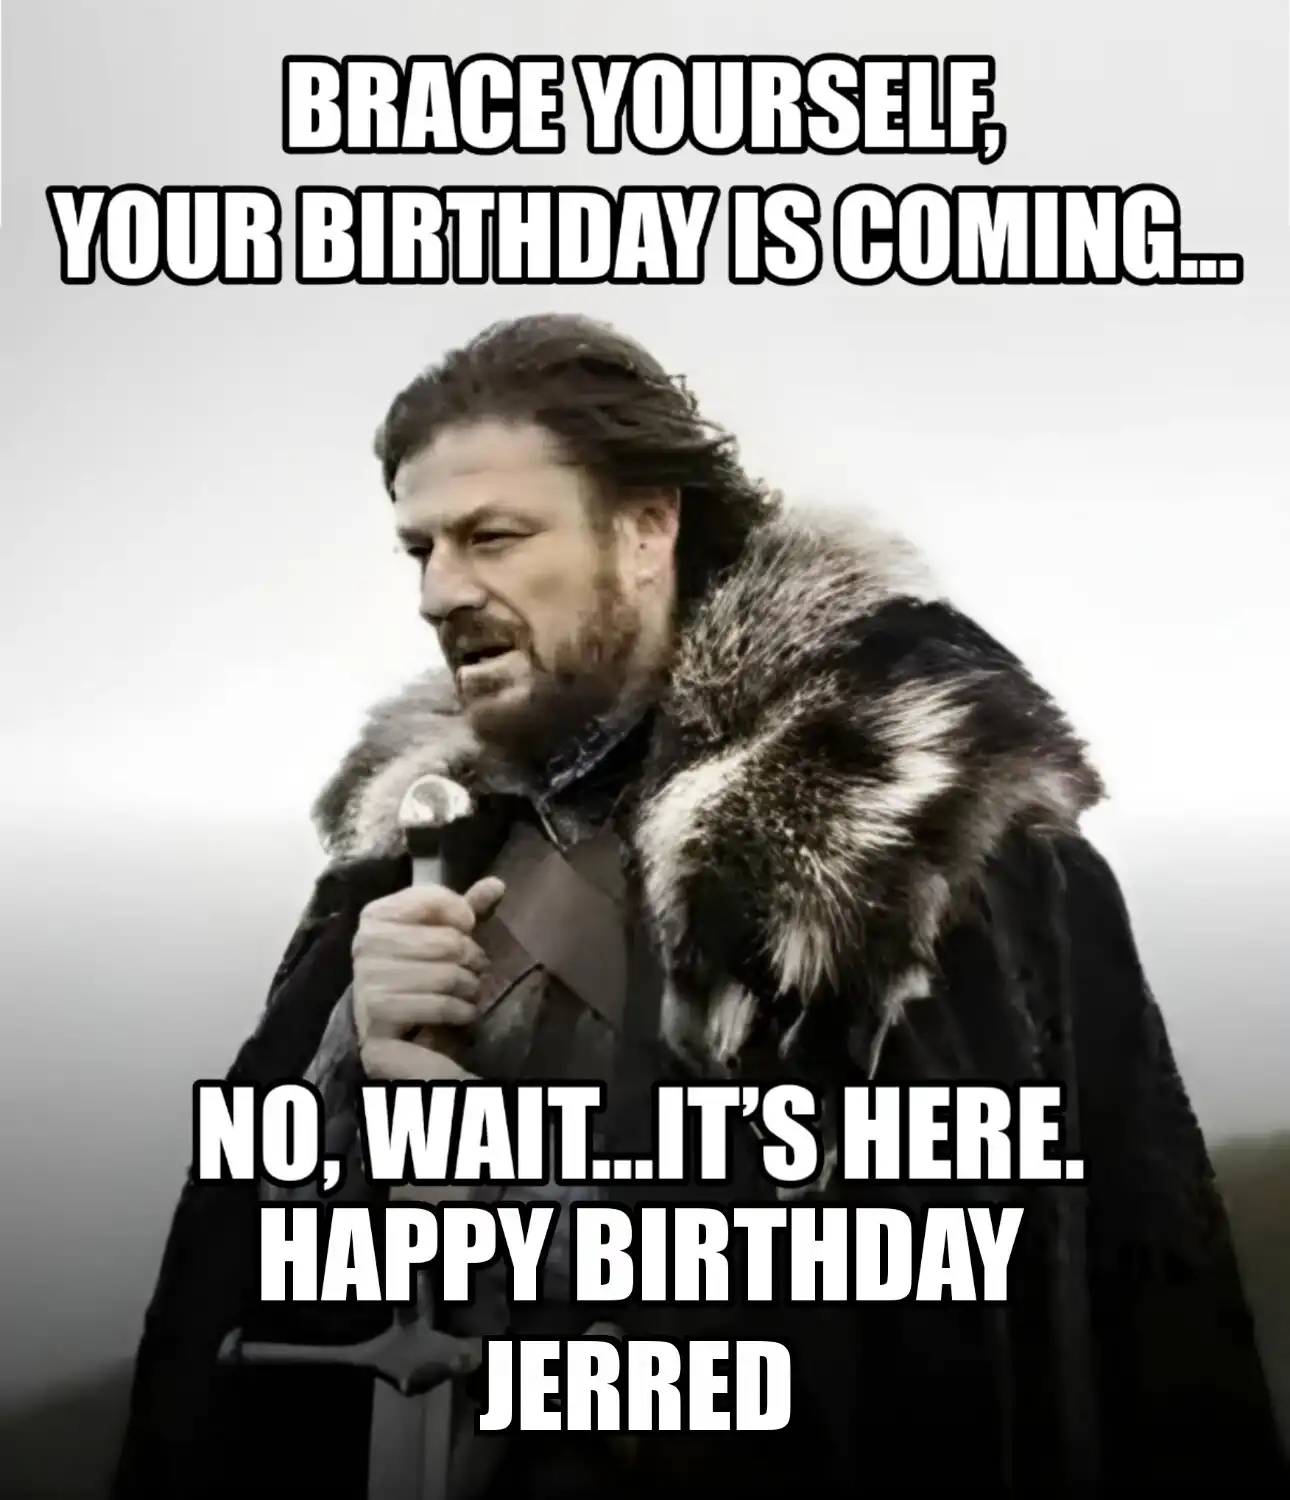 Happy Birthday Jerred Brace Yourself Your Birthday Is Coming Meme